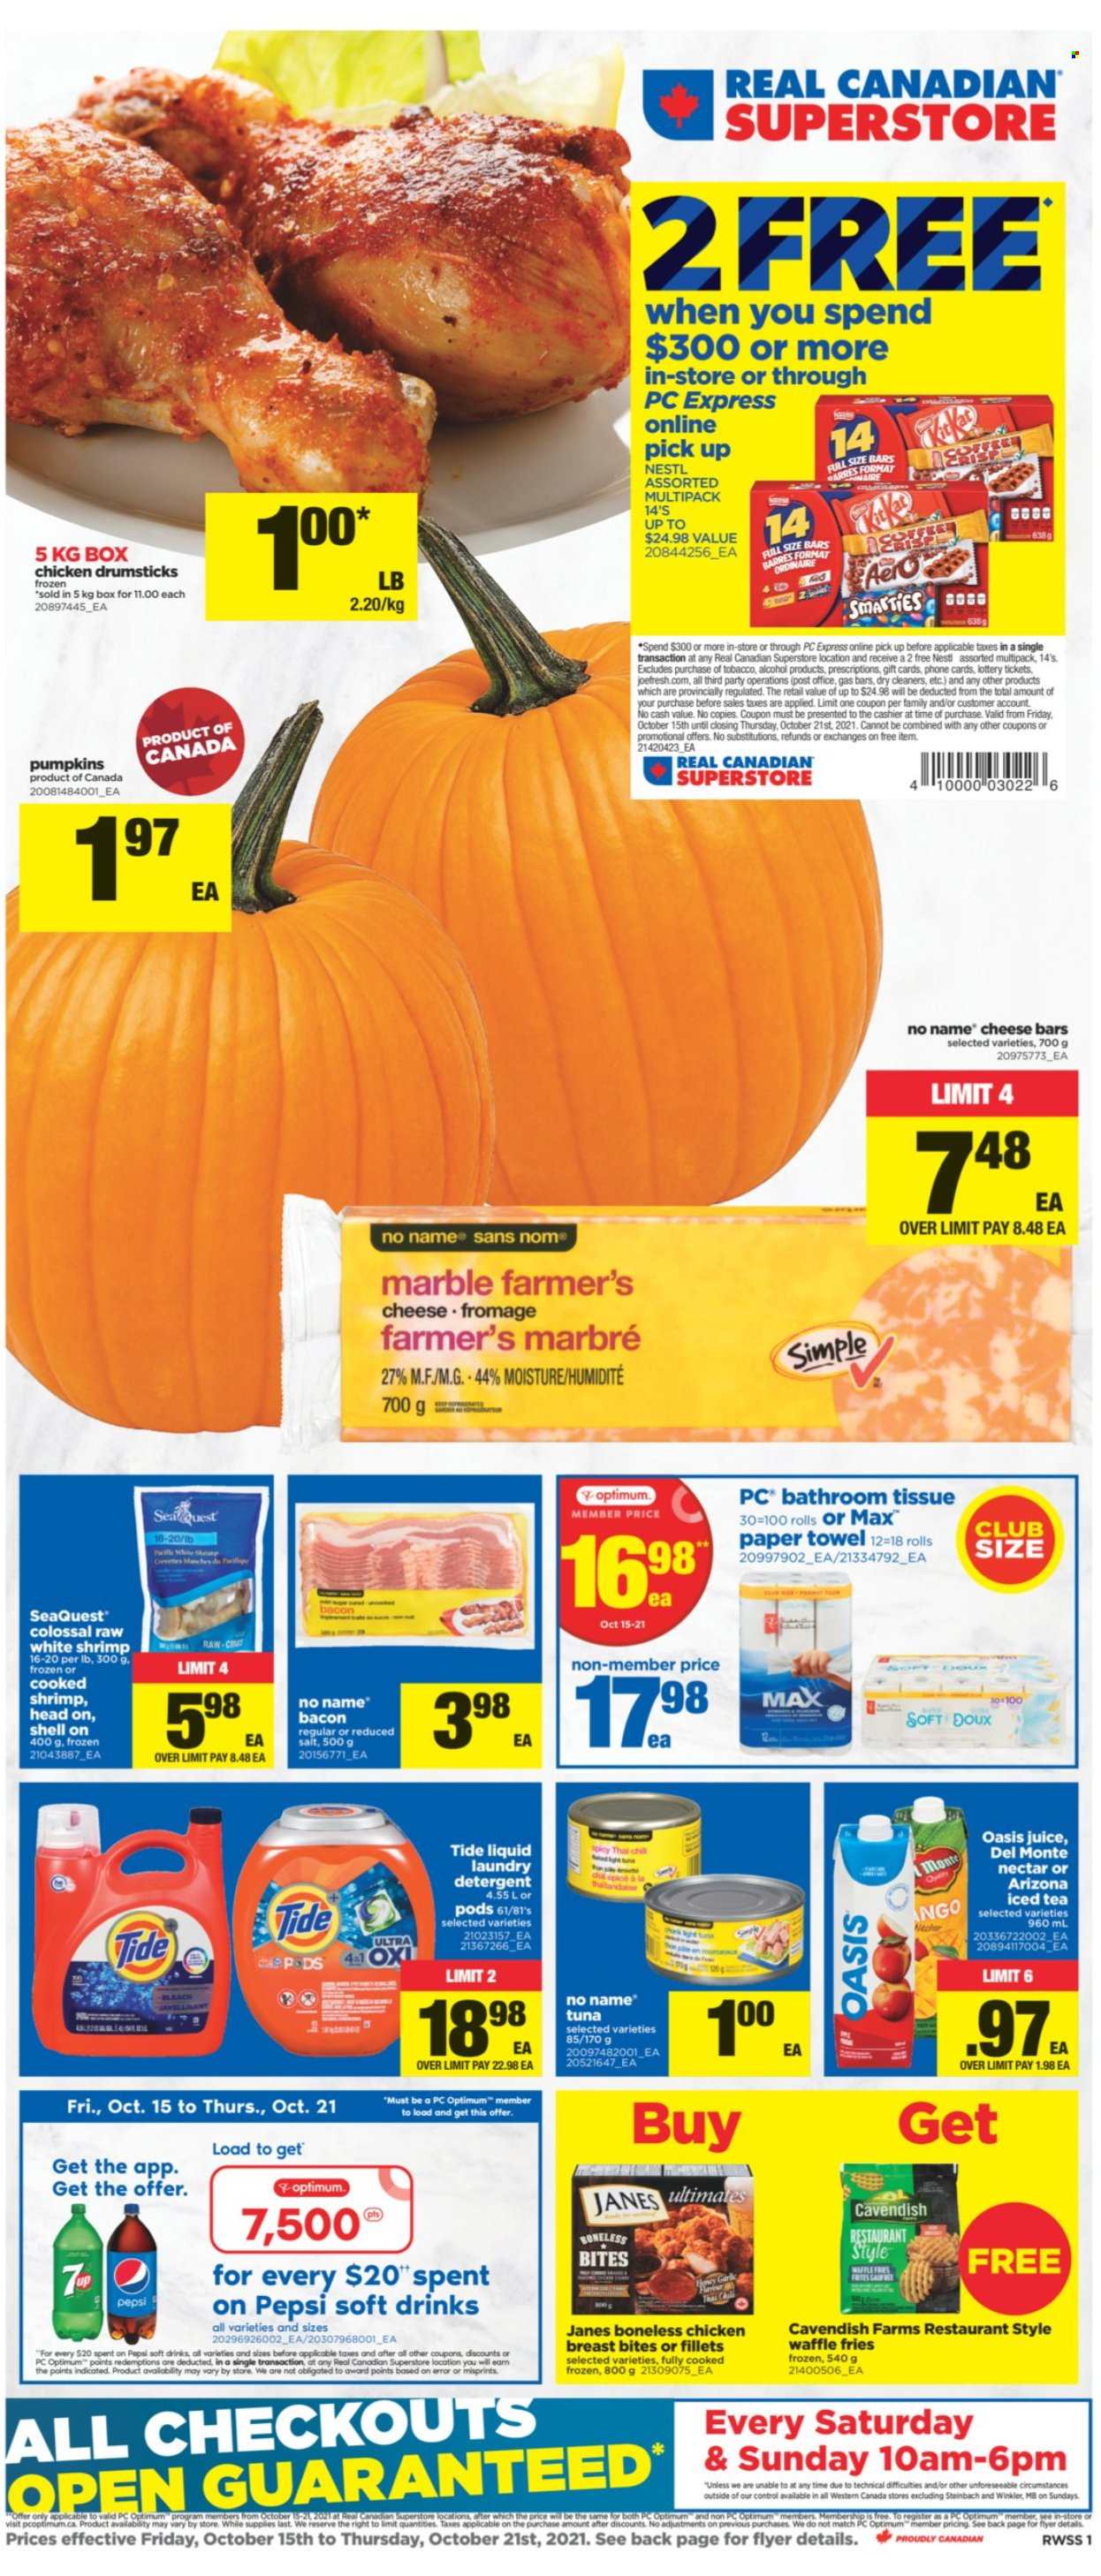 thumbnail - Circulaire Real Canadian Superstore - 15 Octobre 2021 - 21 Octobre 2021 - Produits soldés - bacon, fromage, Oasis, nectar, Pepsi, détergent. Page 1.